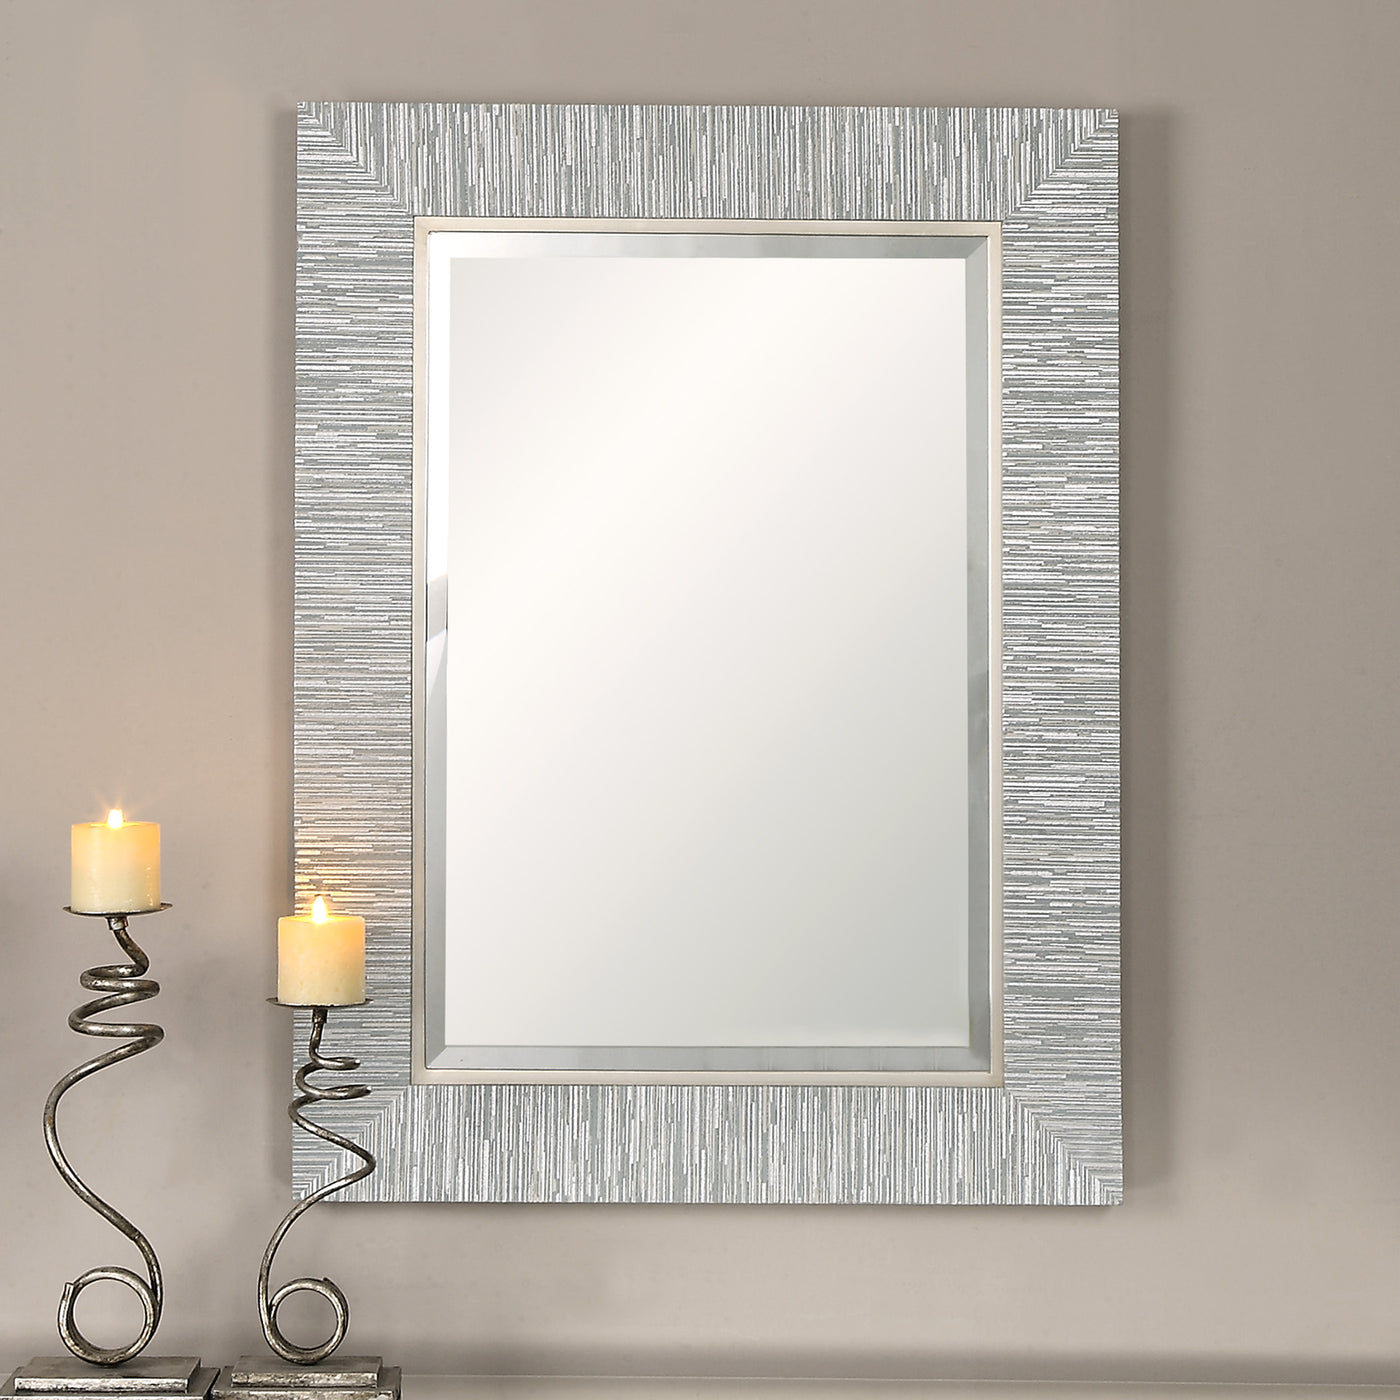 Solid Wood Frame With A Blue-gray And Silver Striped, Textured Wrap Finish Accented With A Silver Leaf Inner Lip. Mirror I...